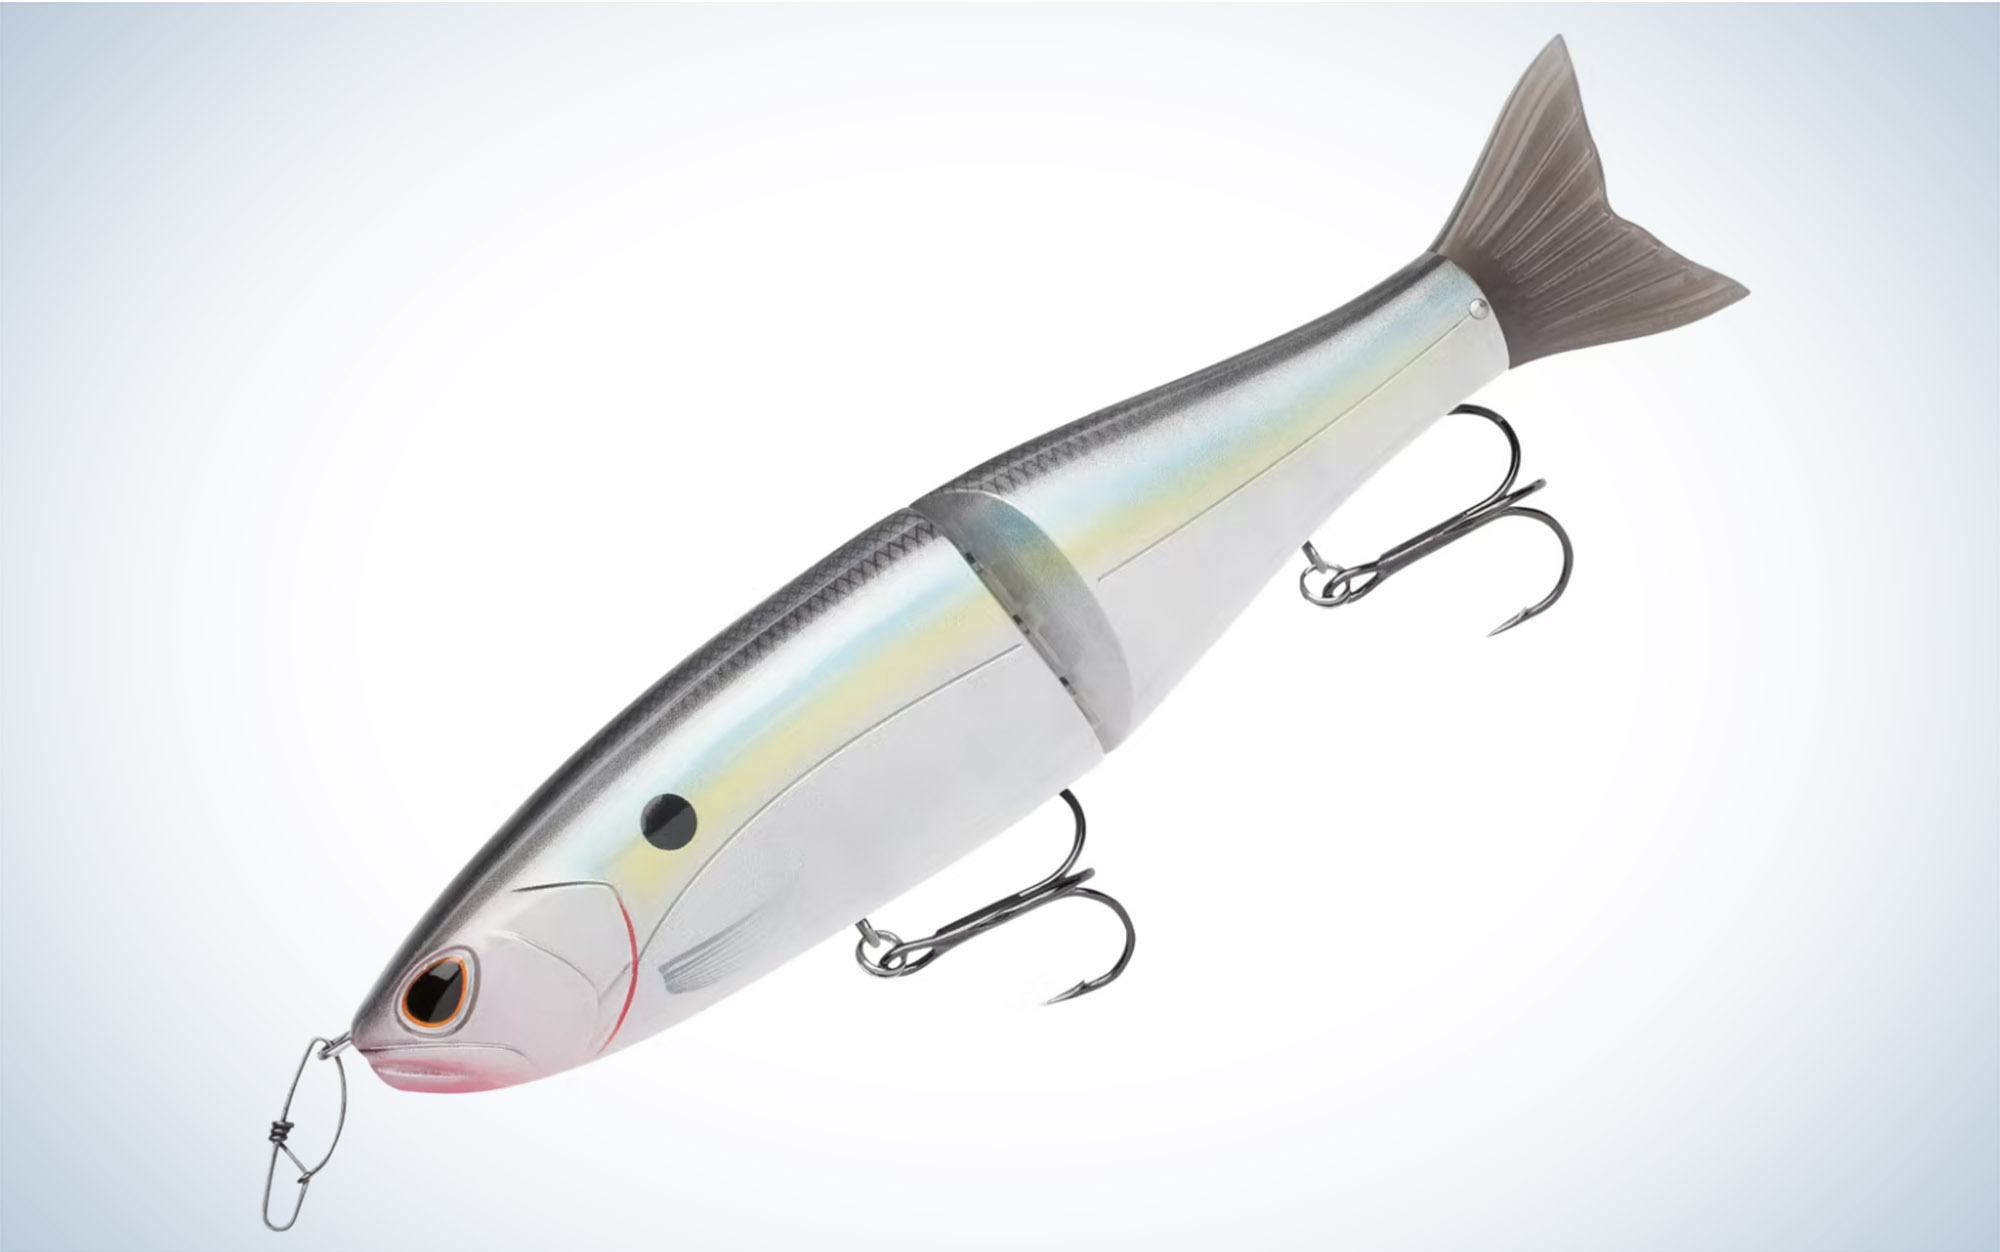 The STORM Arashi is one of the best glide baits.